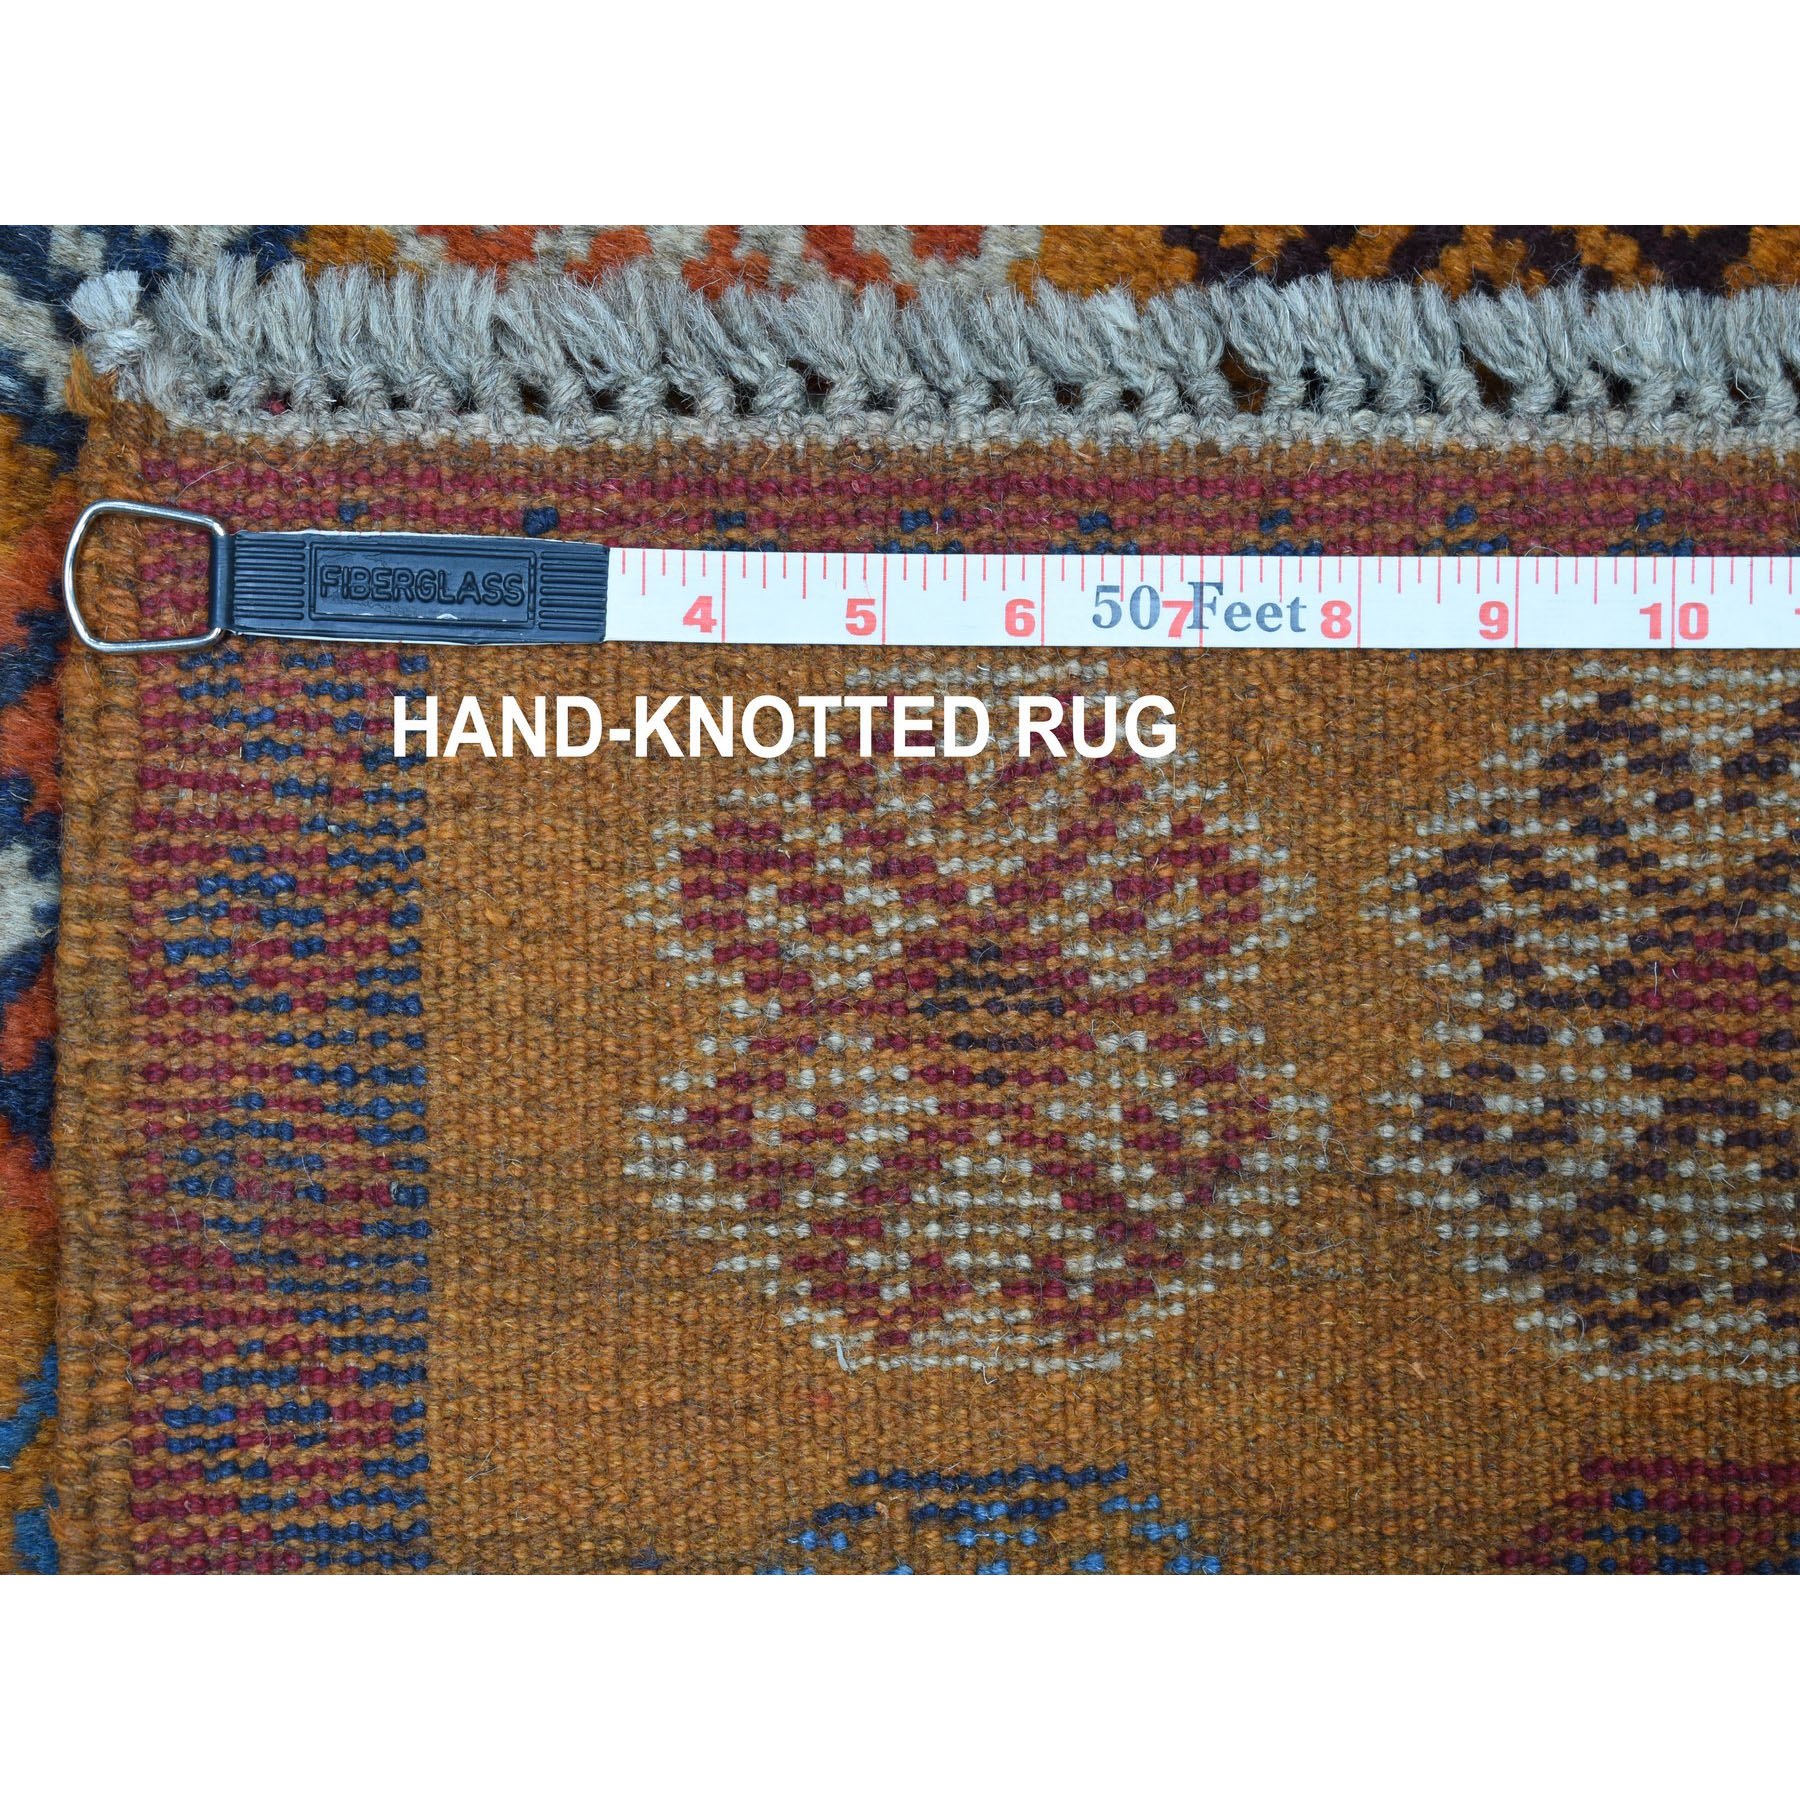 3-8 x5-7  Orange Colorful Afghan Baluch Tribal Design Hand Knotted Pure Wool Oriental Rug 